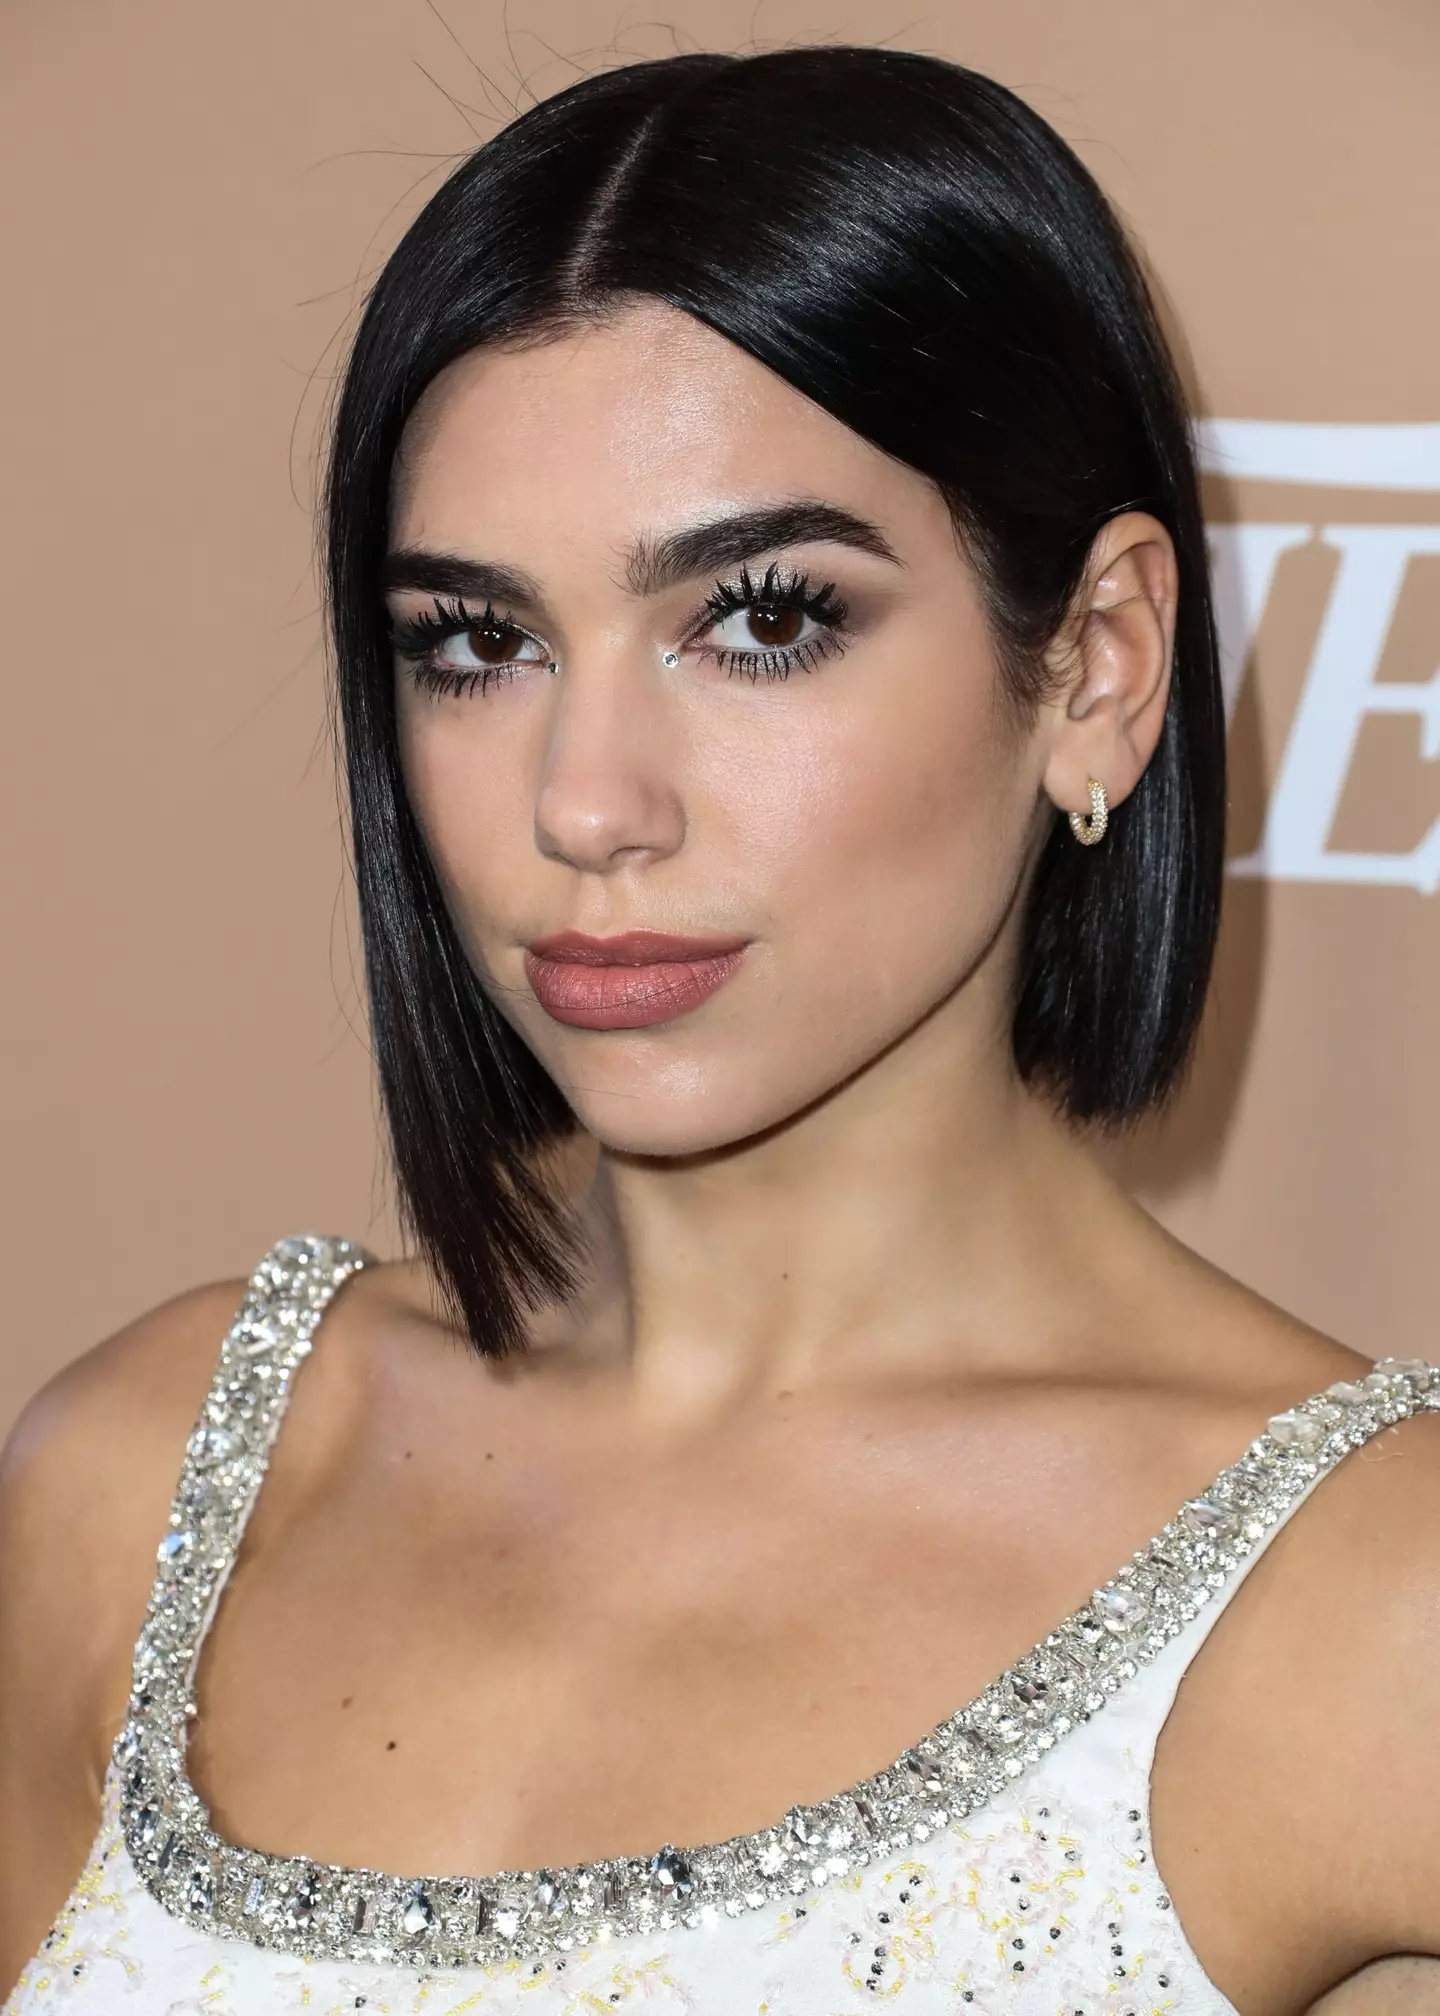 Dua Lipa finally addresses the hate comments for her viral dancing meme.